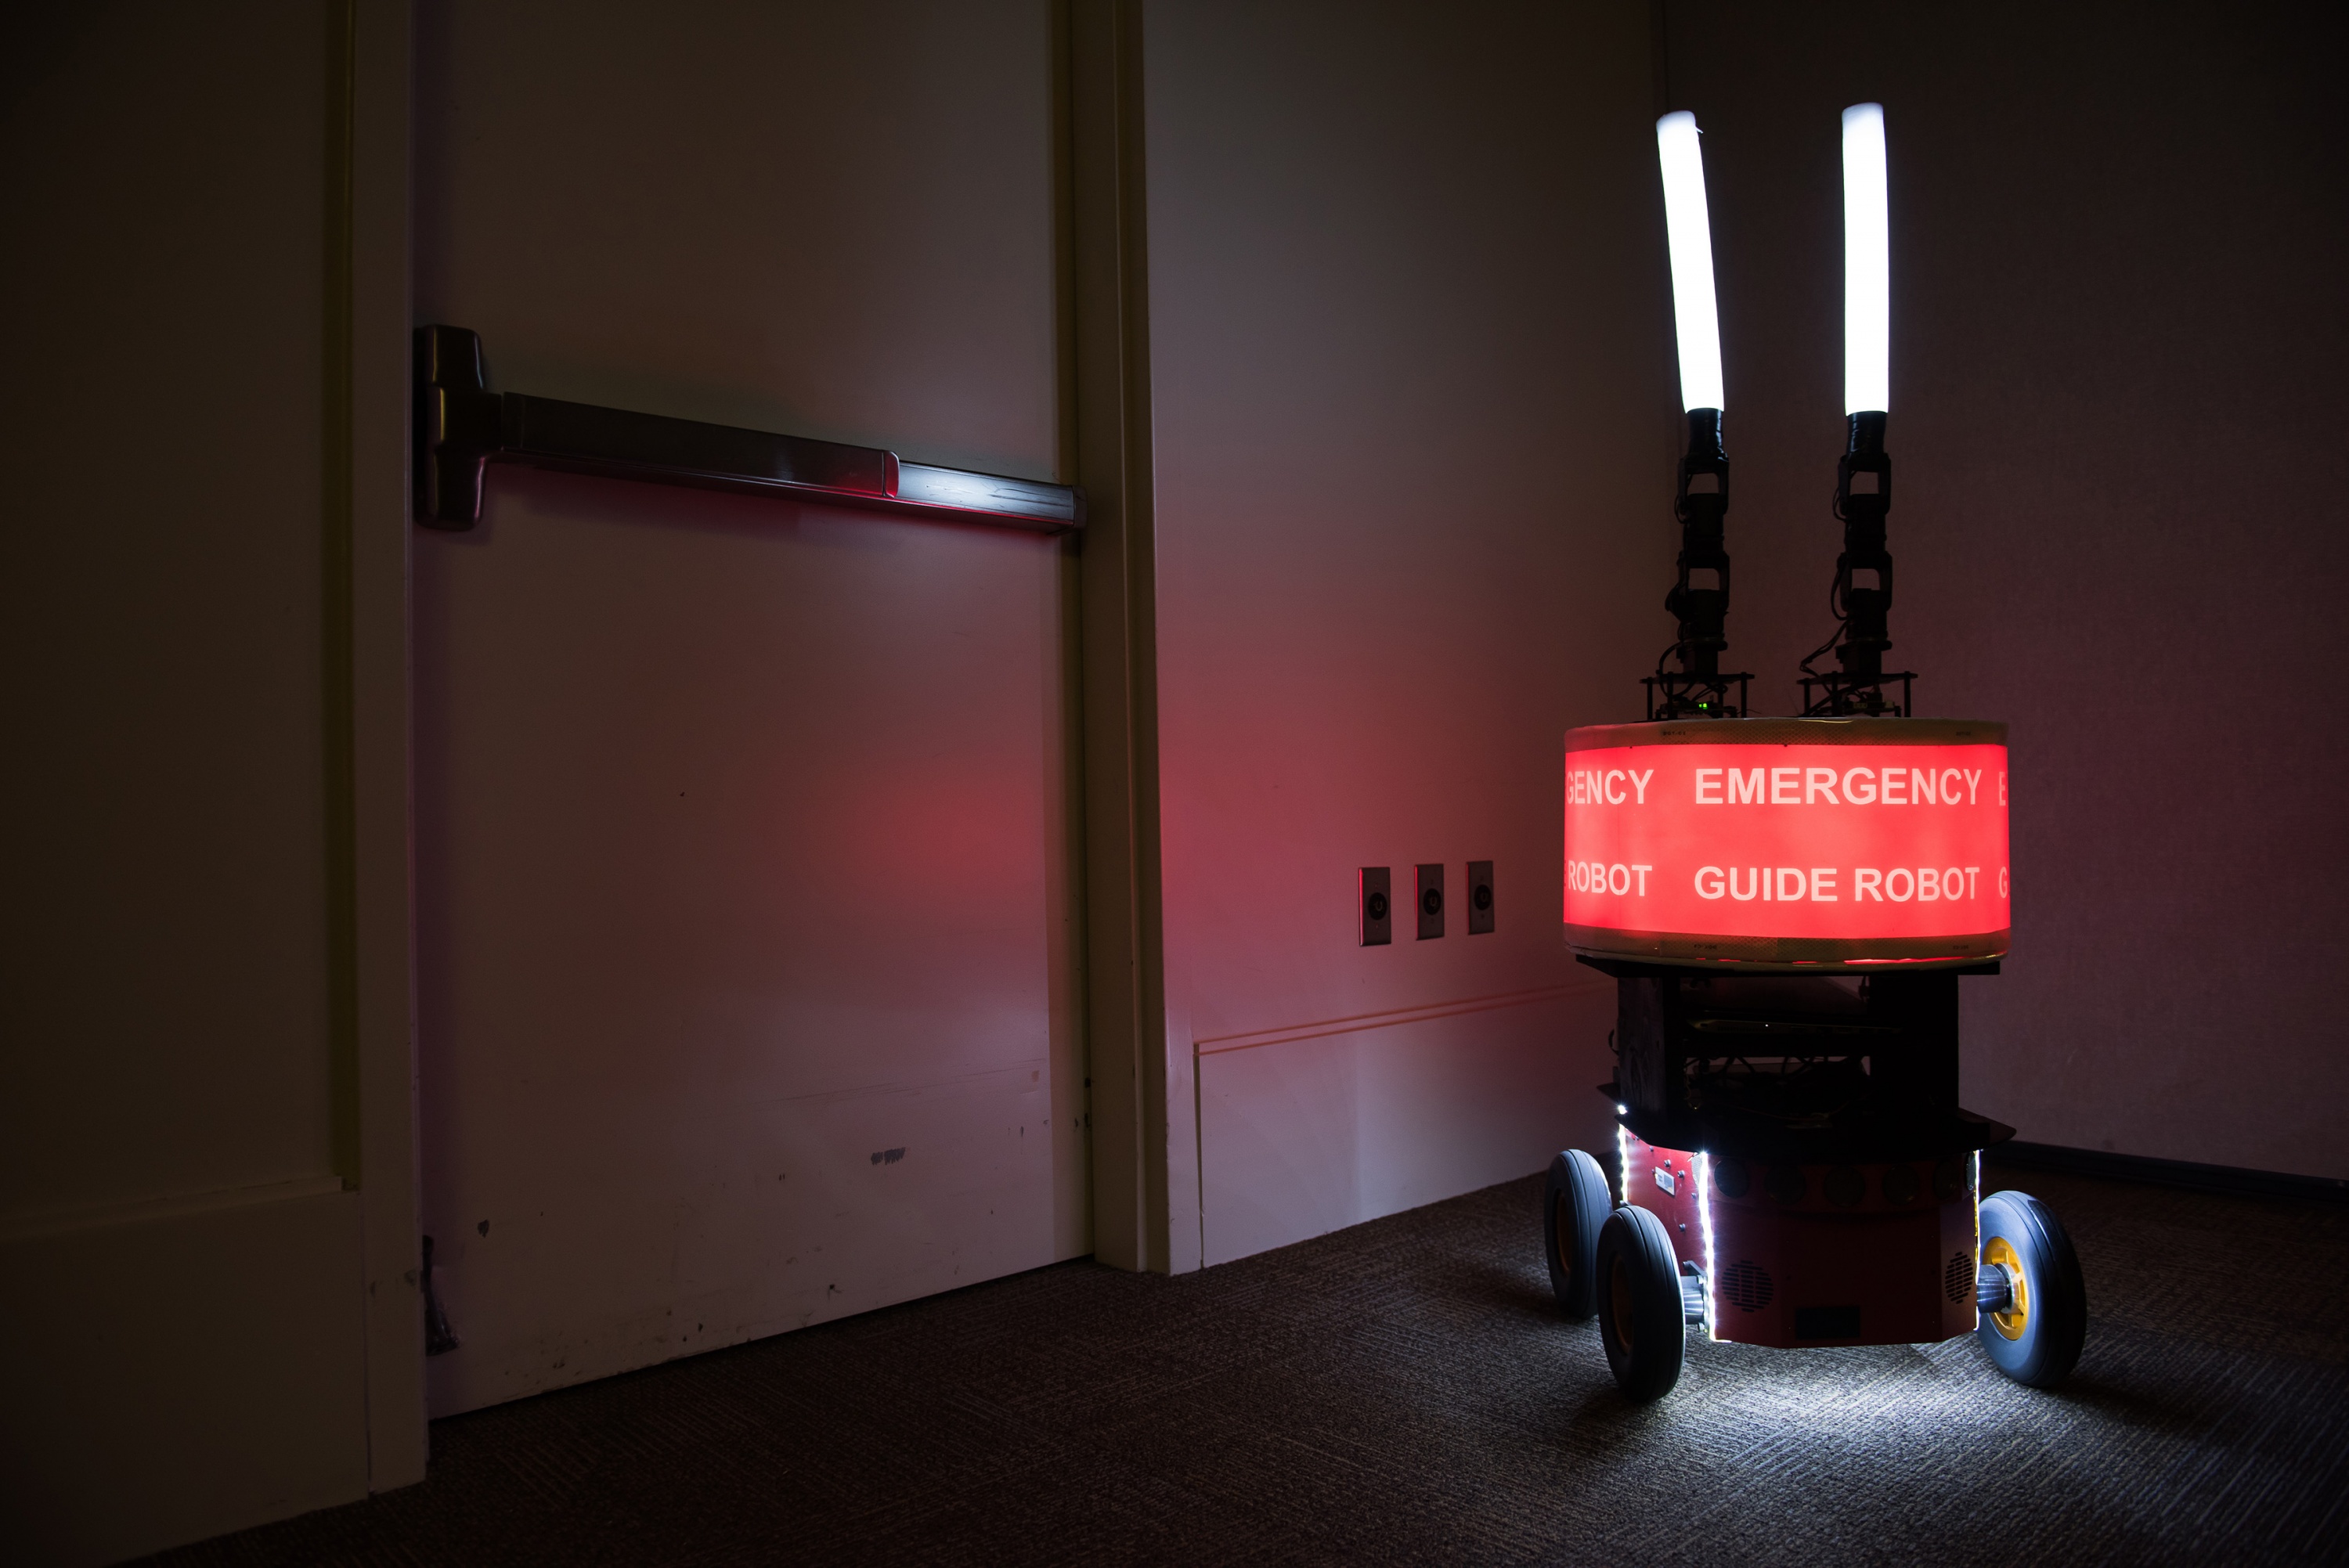 Georgia Tech researchers built the “Rescue Robot” to determine whether or not building occupants would trust a robot designed to help them evacuate a high-rise in case of fire or other emergency. (Credit: Rob Felt, Georgia Tech)